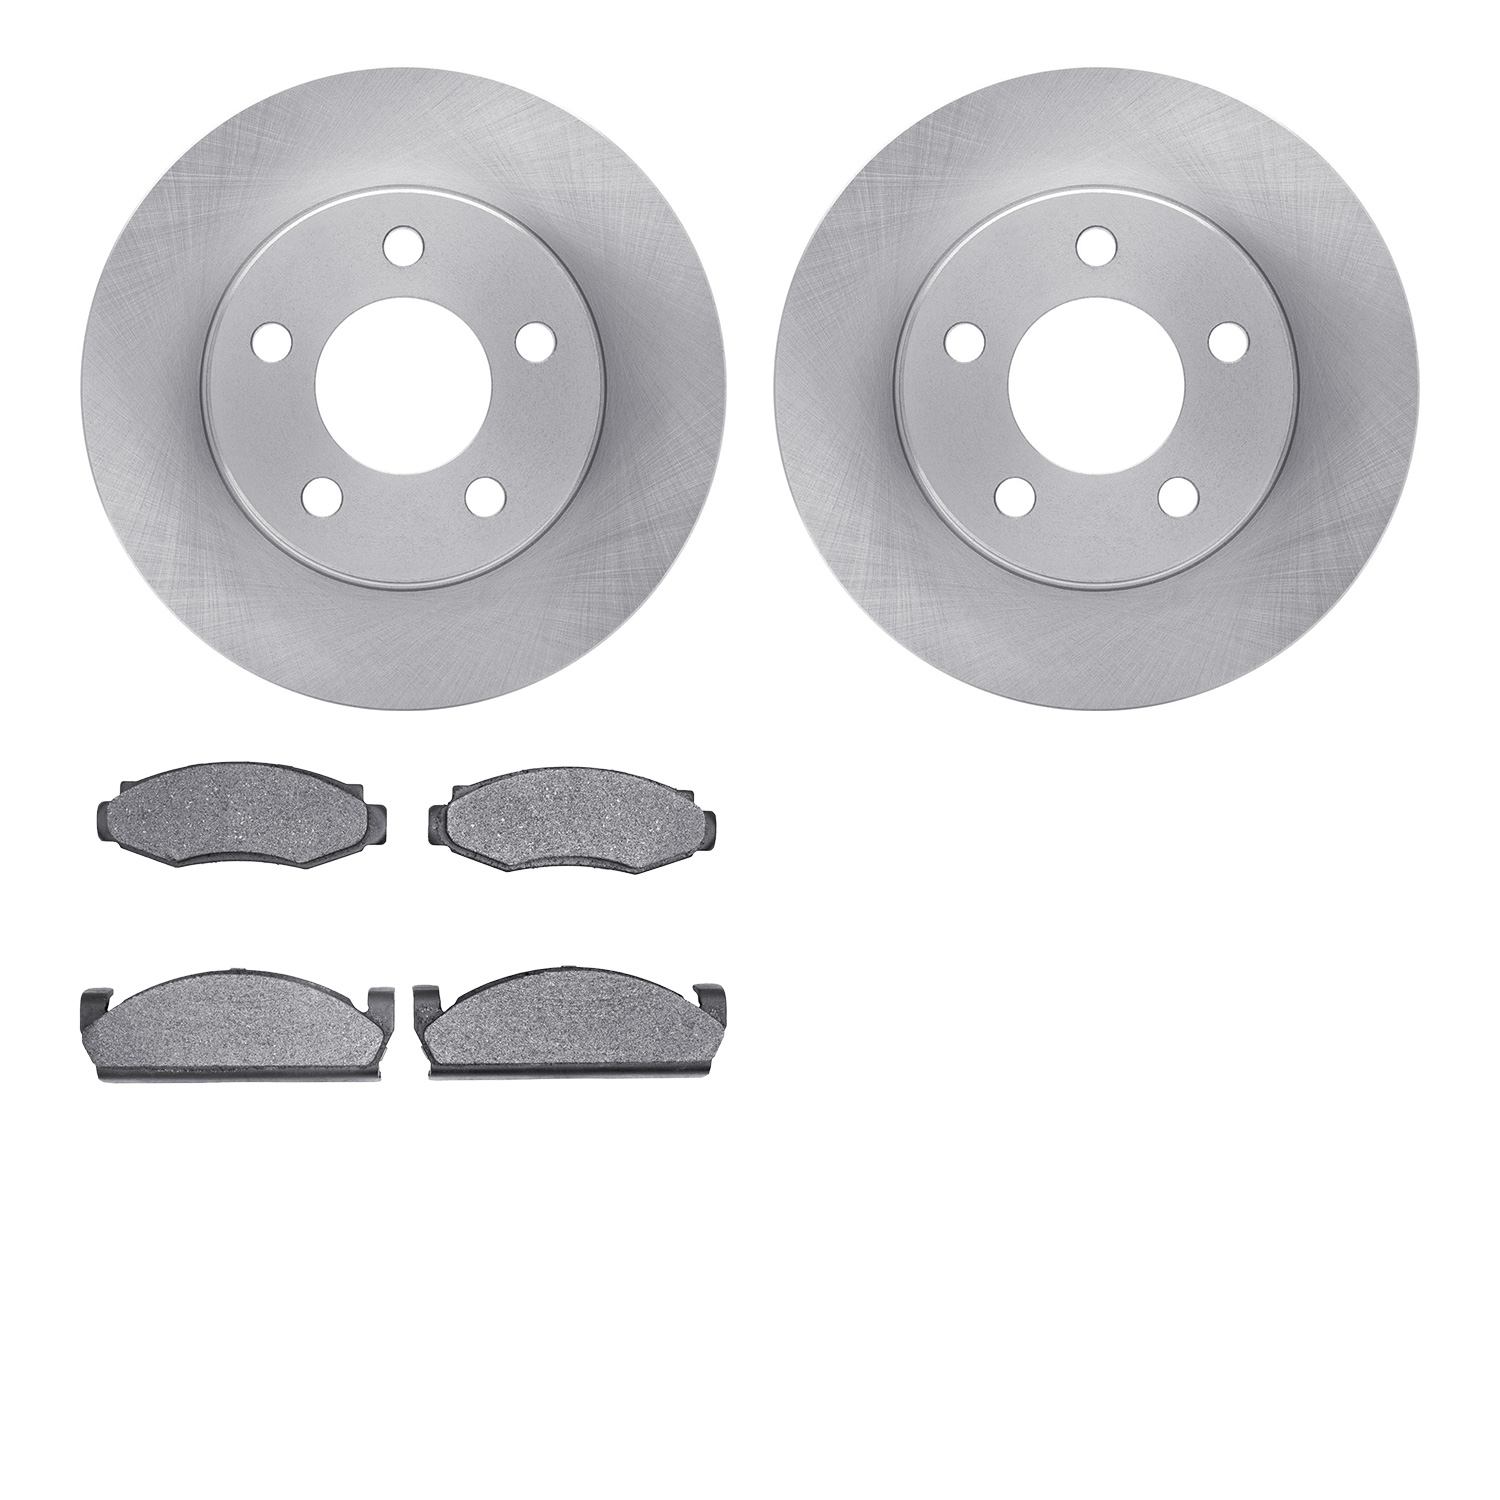 6402-42046 Brake Rotors with Ultimate-Duty Brake Pads, 1980-1981 GM, Position: Front